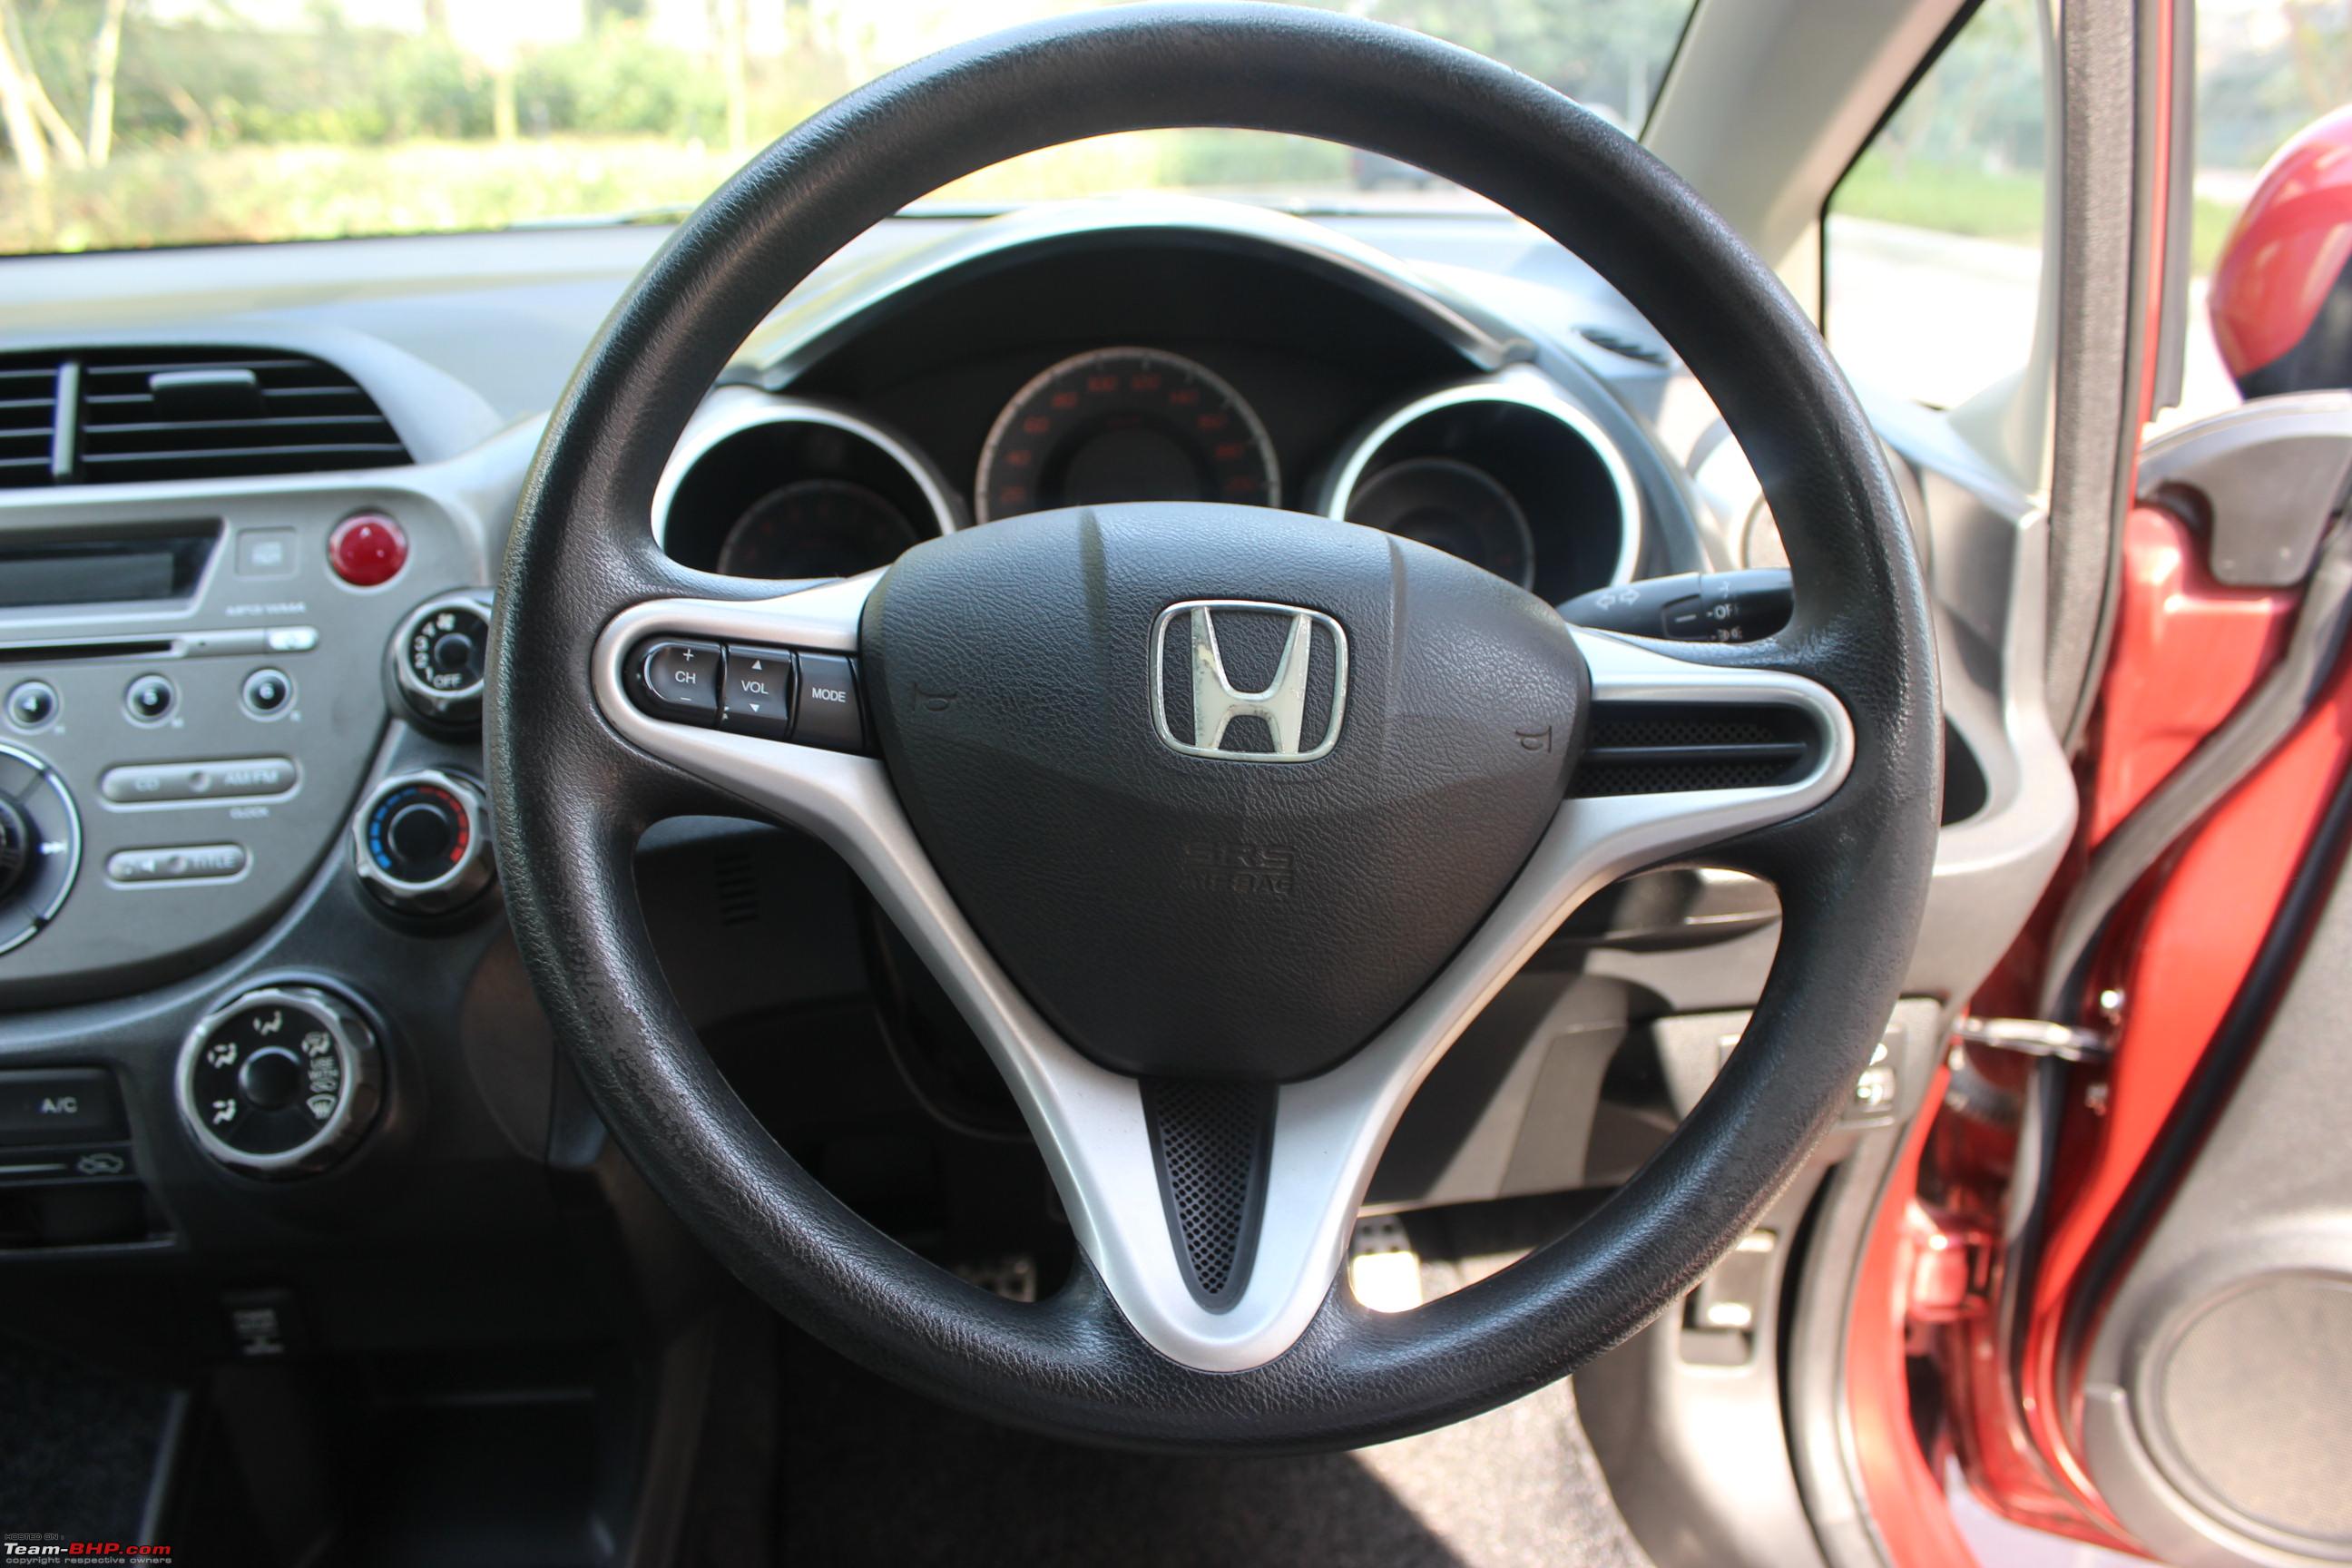 Used Honda Jazz review: 2002-2014 | CarsGuide